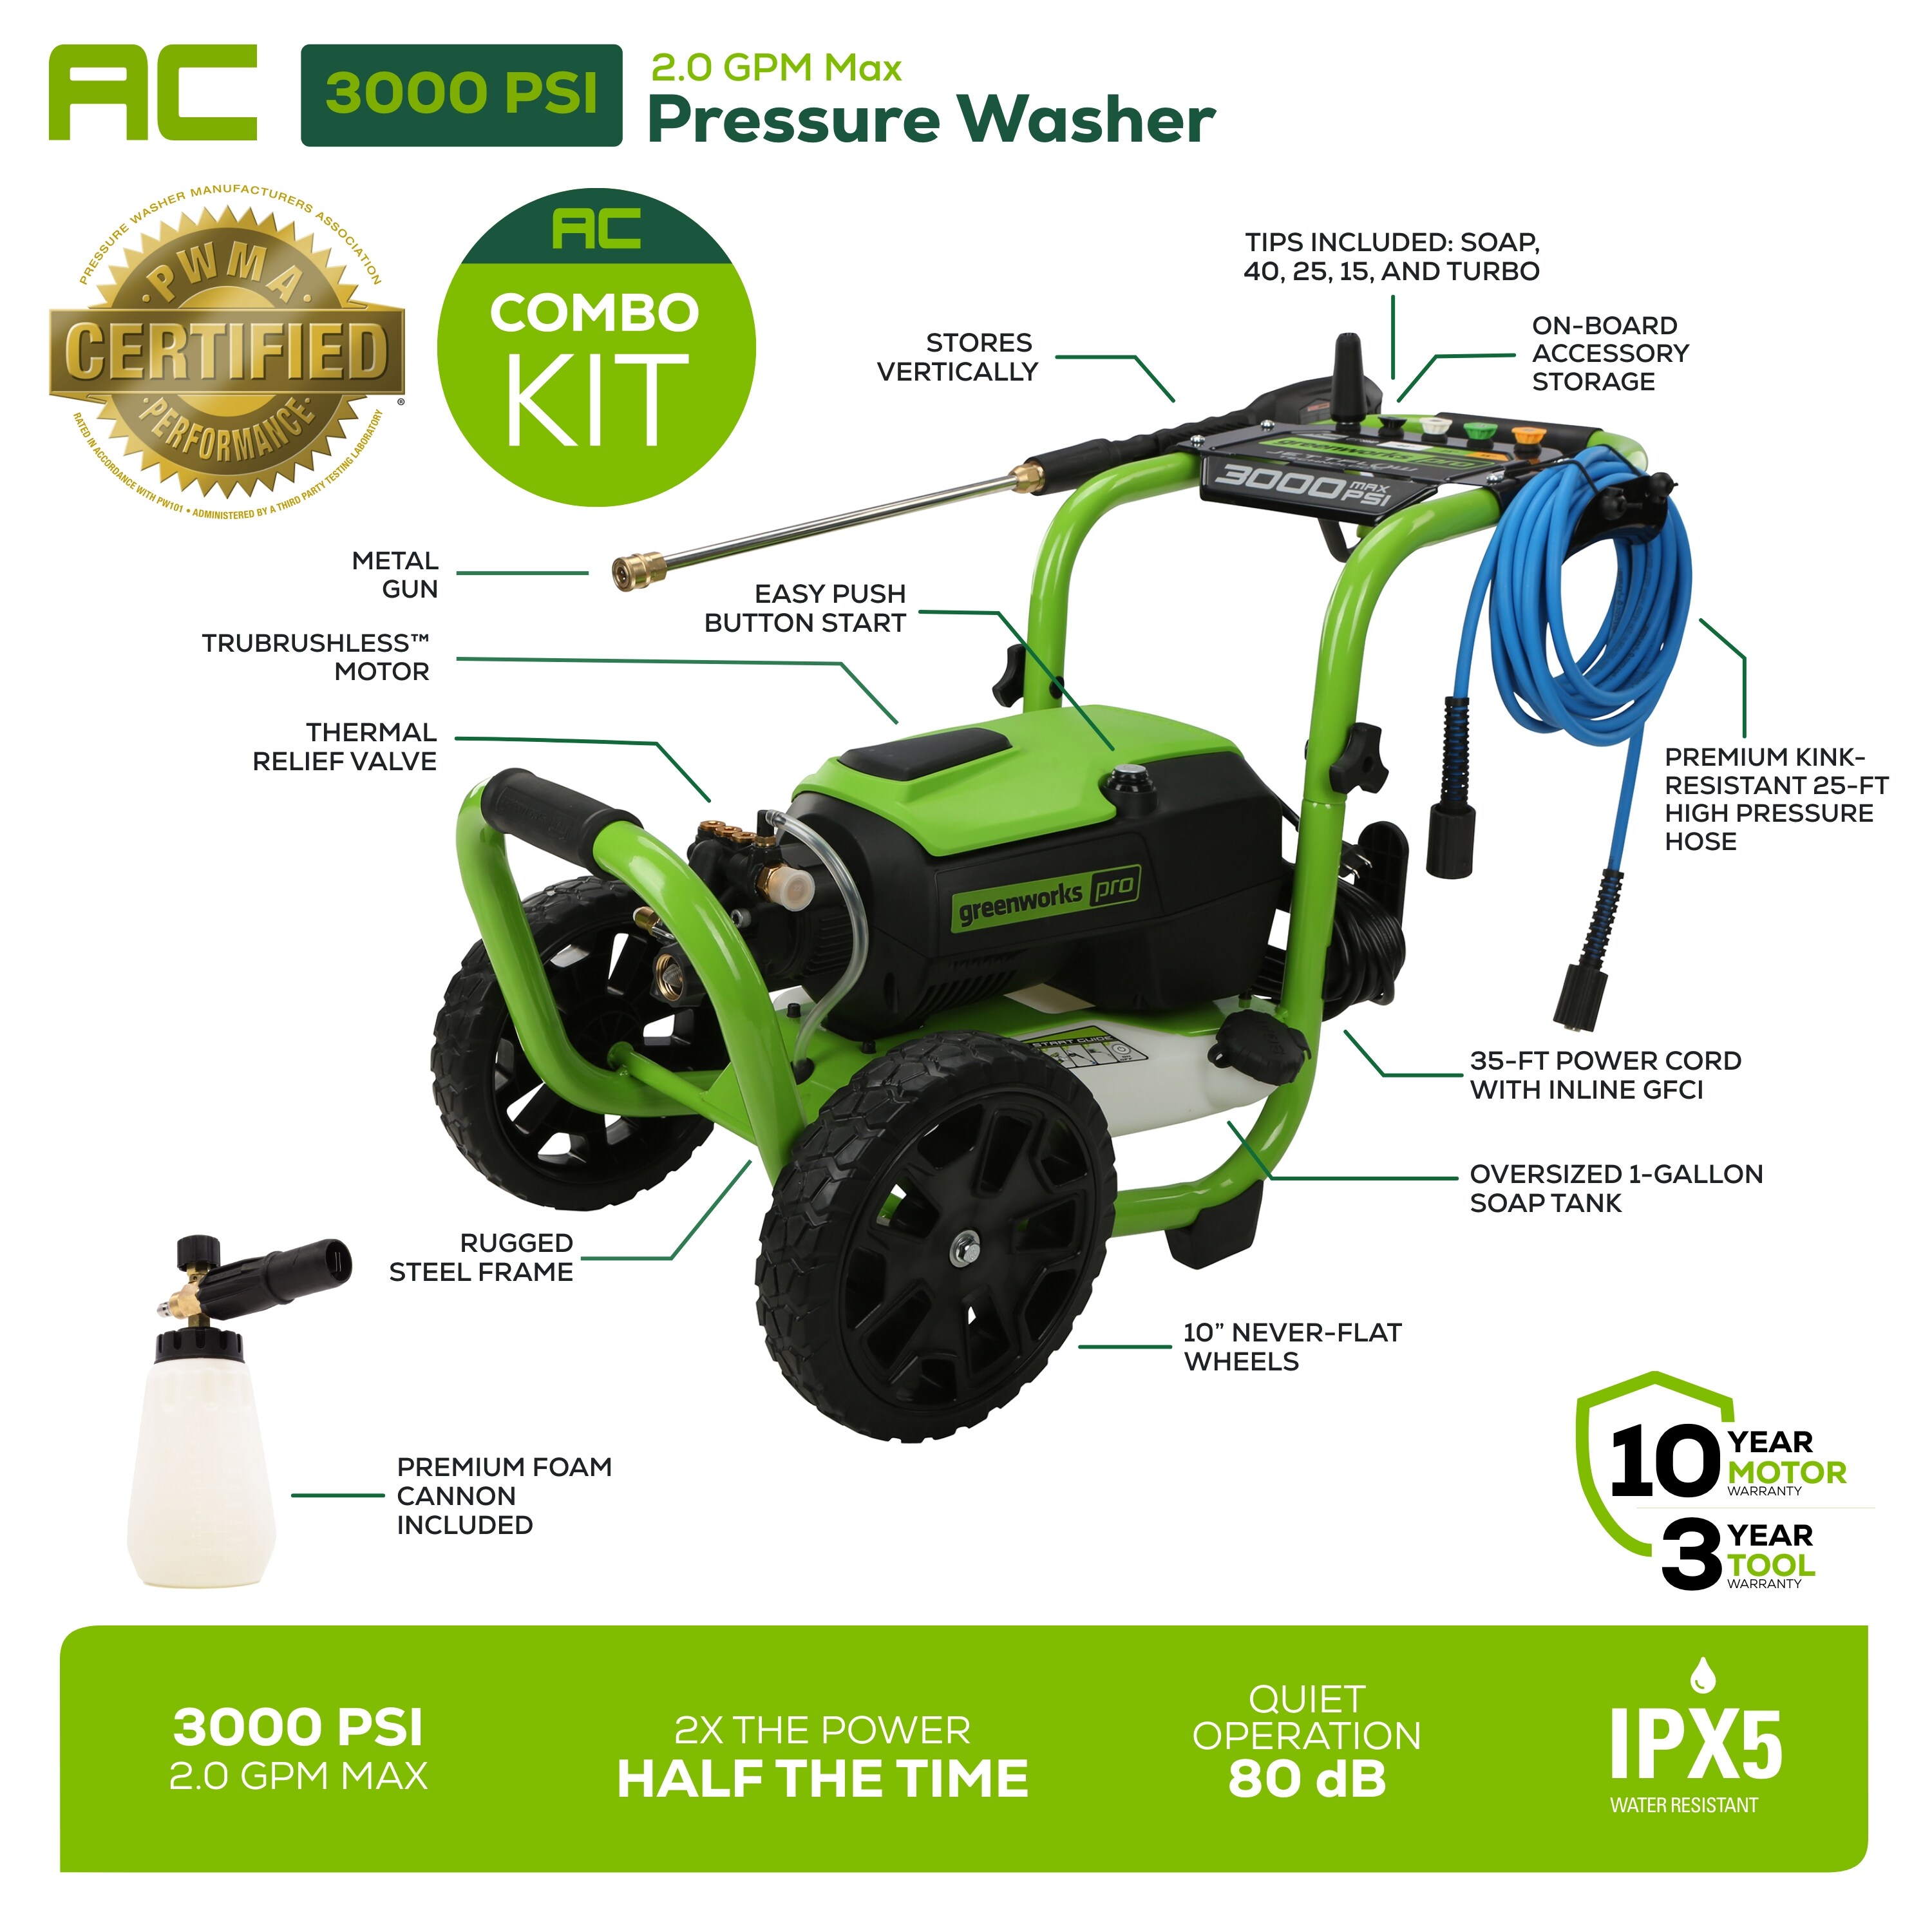 Greenworks Premium Foam Cannon (3700 PSI MAX) in the Pressure Washer  Nozzles department at